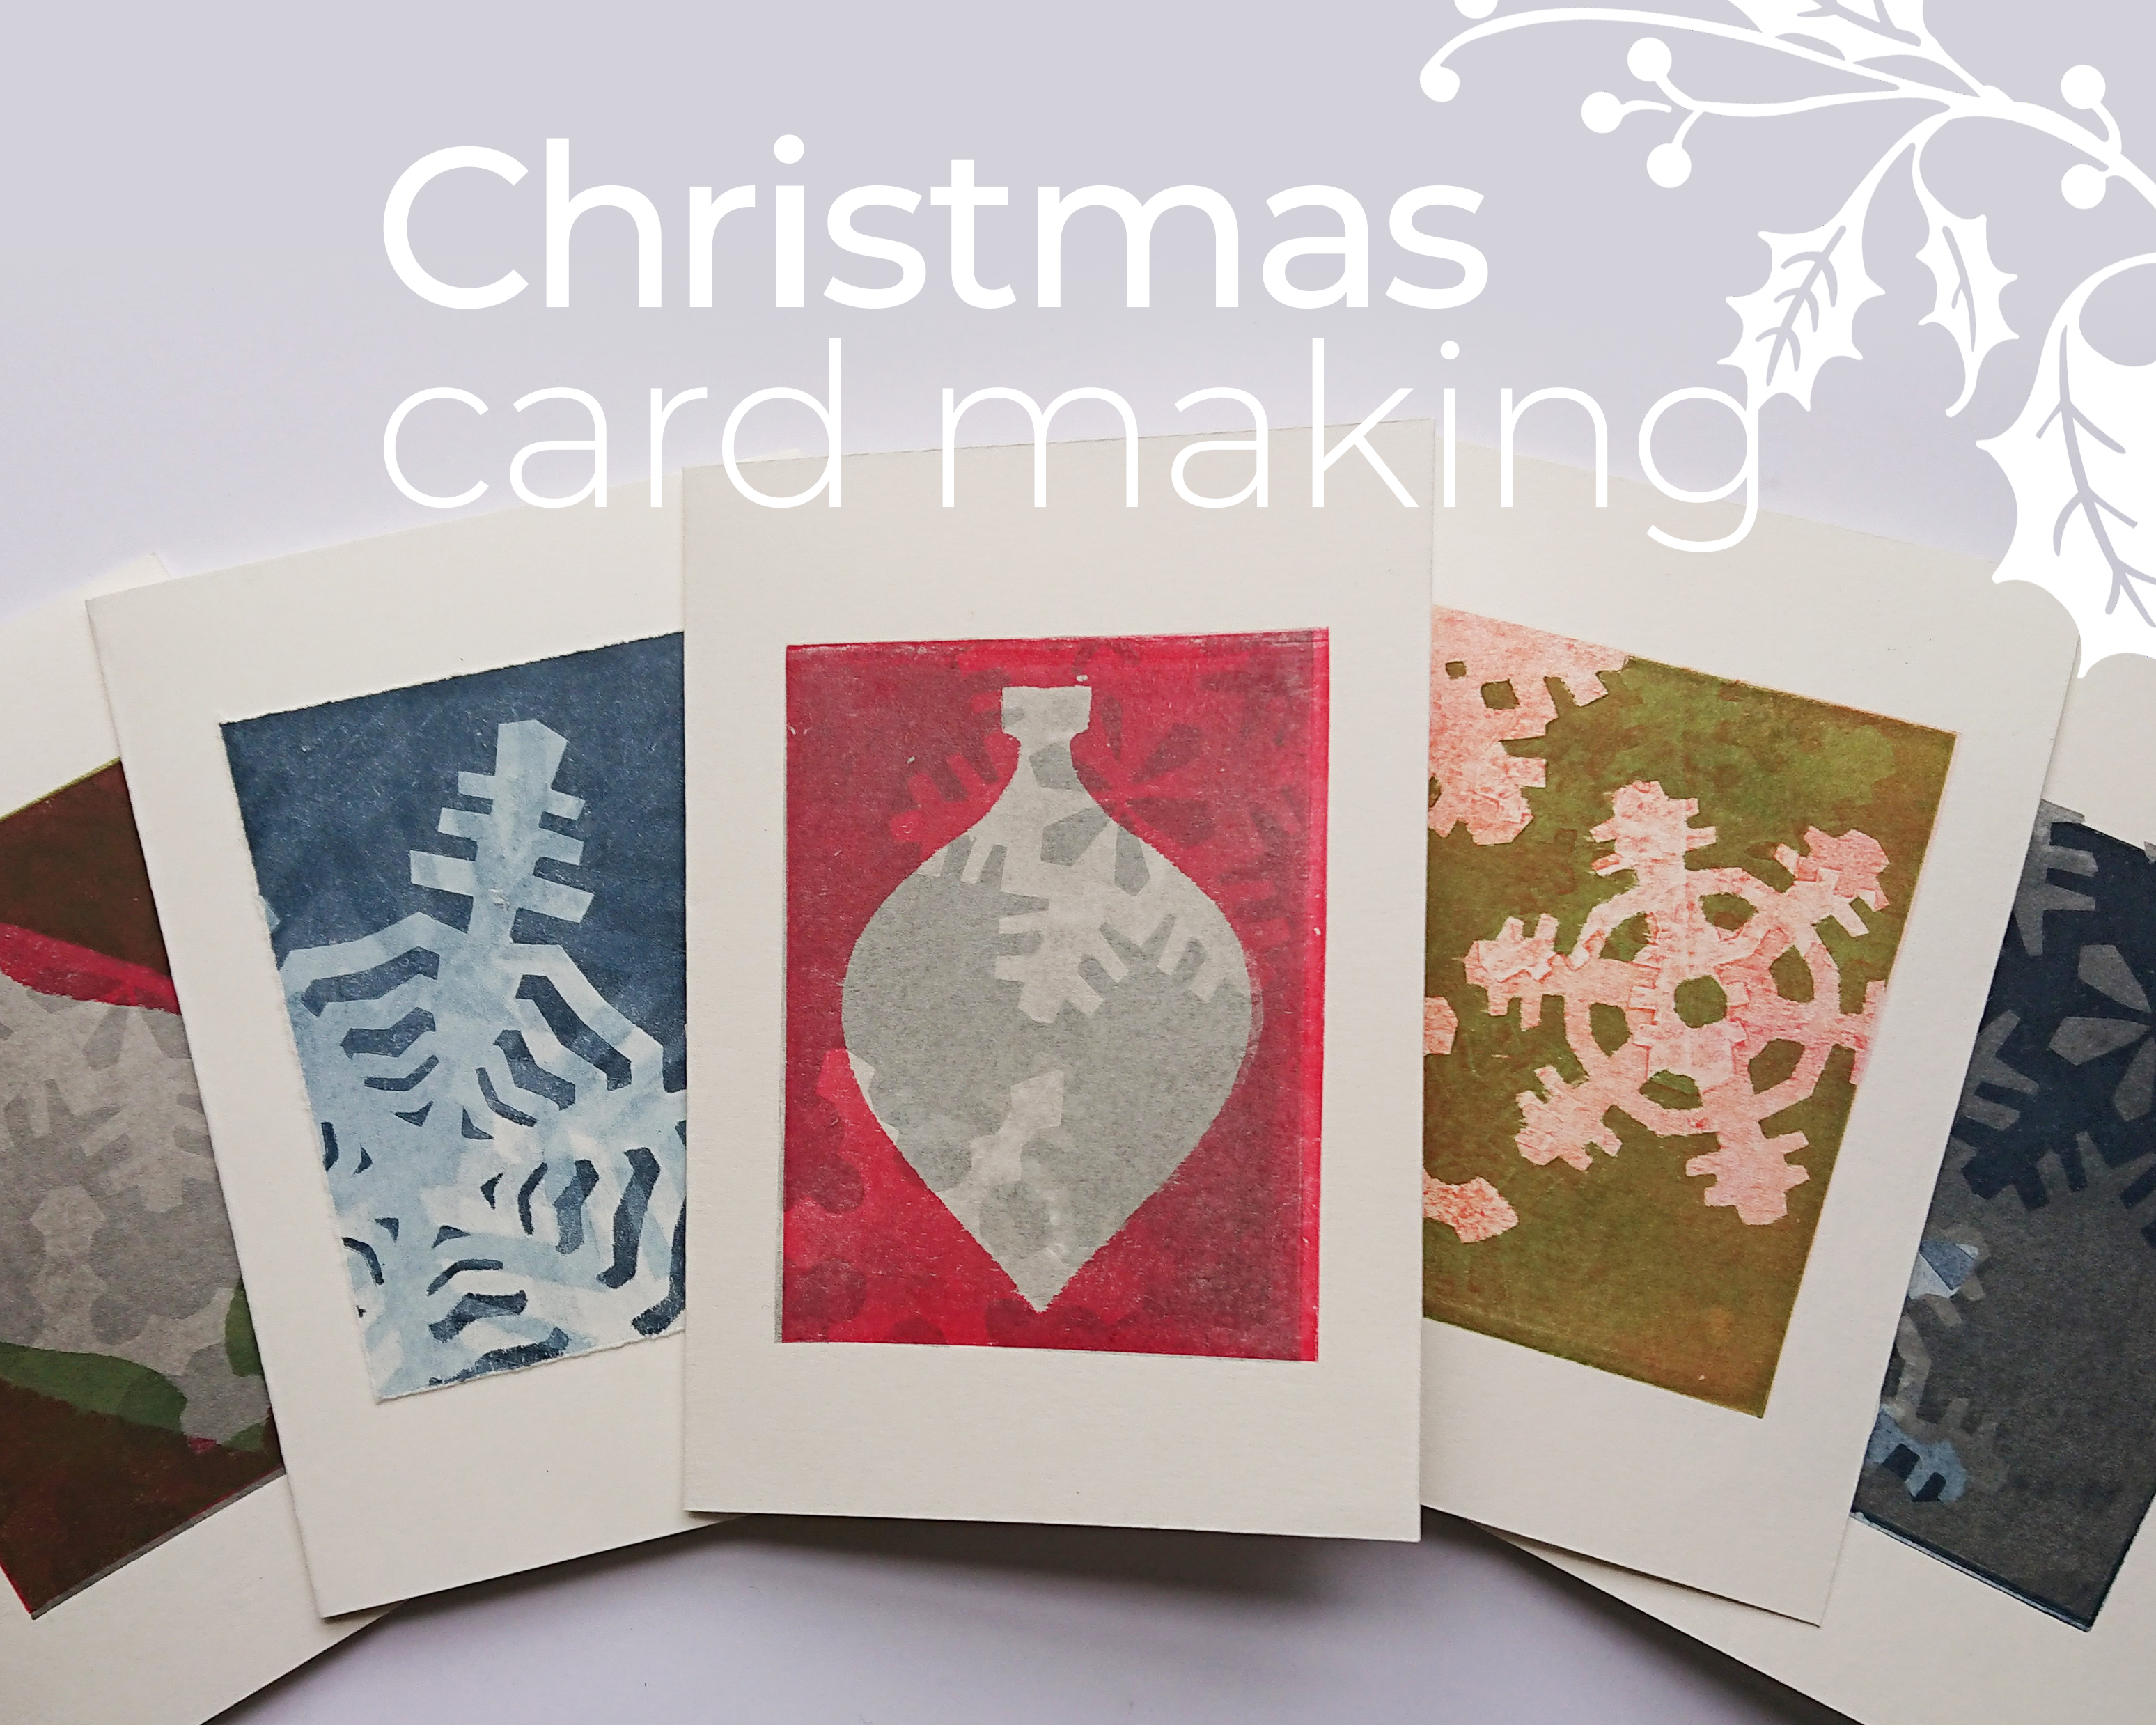 An image of handmade Lino-print Christmas cards. The main colours are blue, green and red. There is overlayed text which reads: Christmas card making.